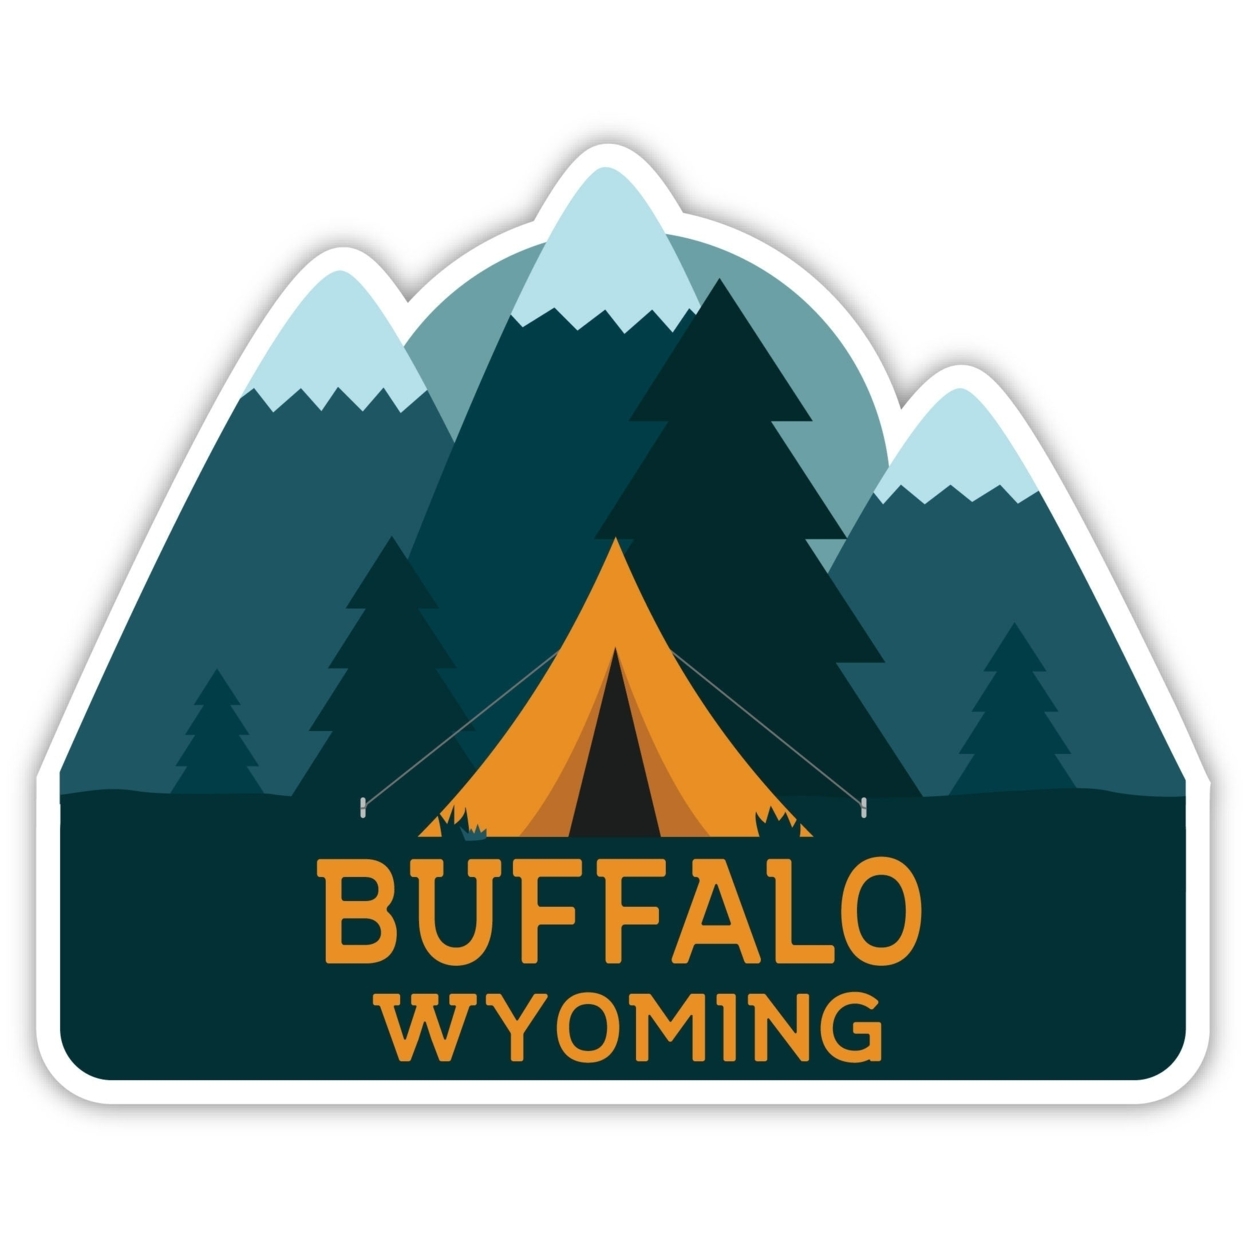 Buffalo Wyoming Souvenir Decorative Stickers (Choose Theme And Size) - Single Unit, 8-Inch, Tent